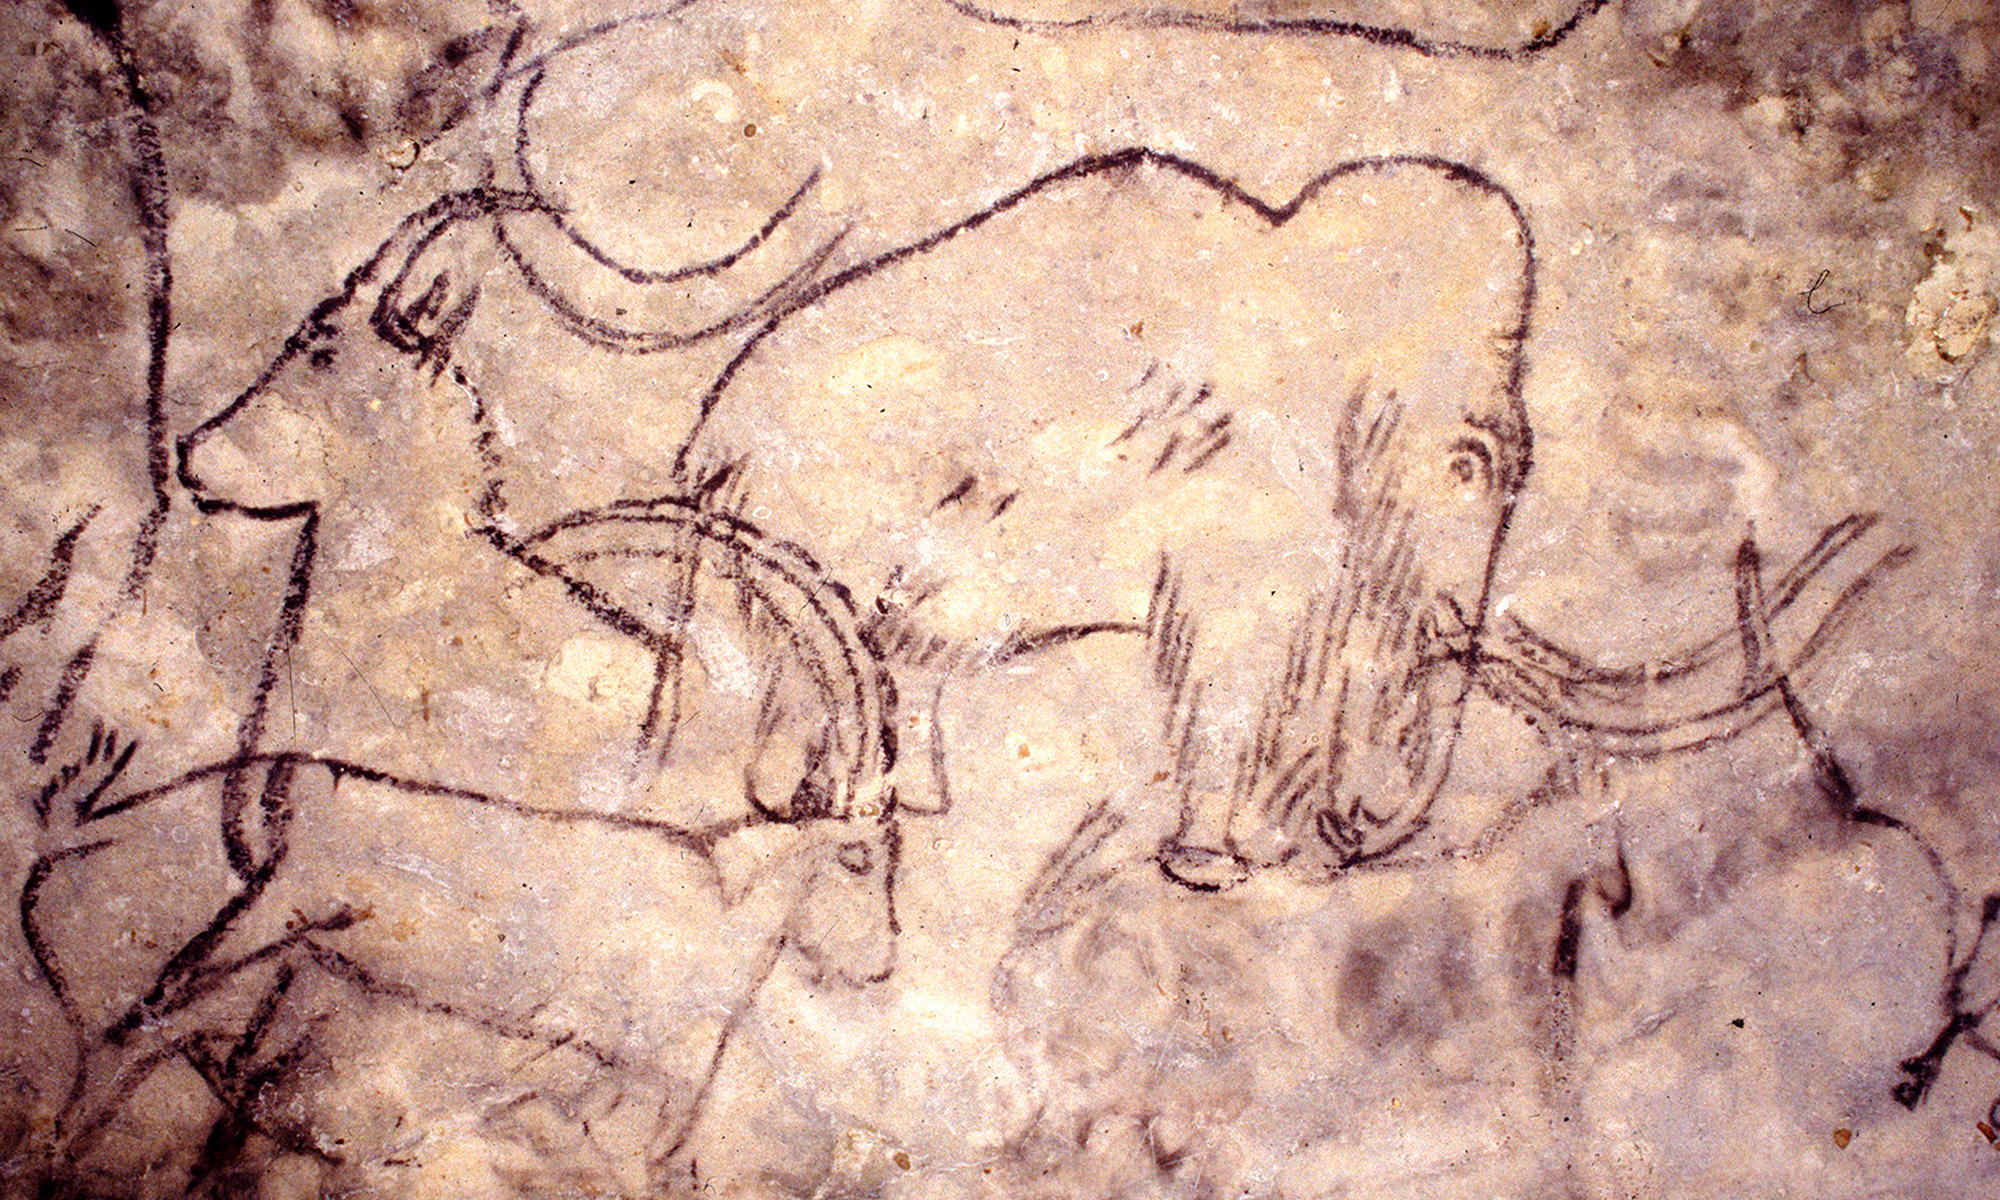 Rouffignac Cave - The Cave of the Hundred Mammoths